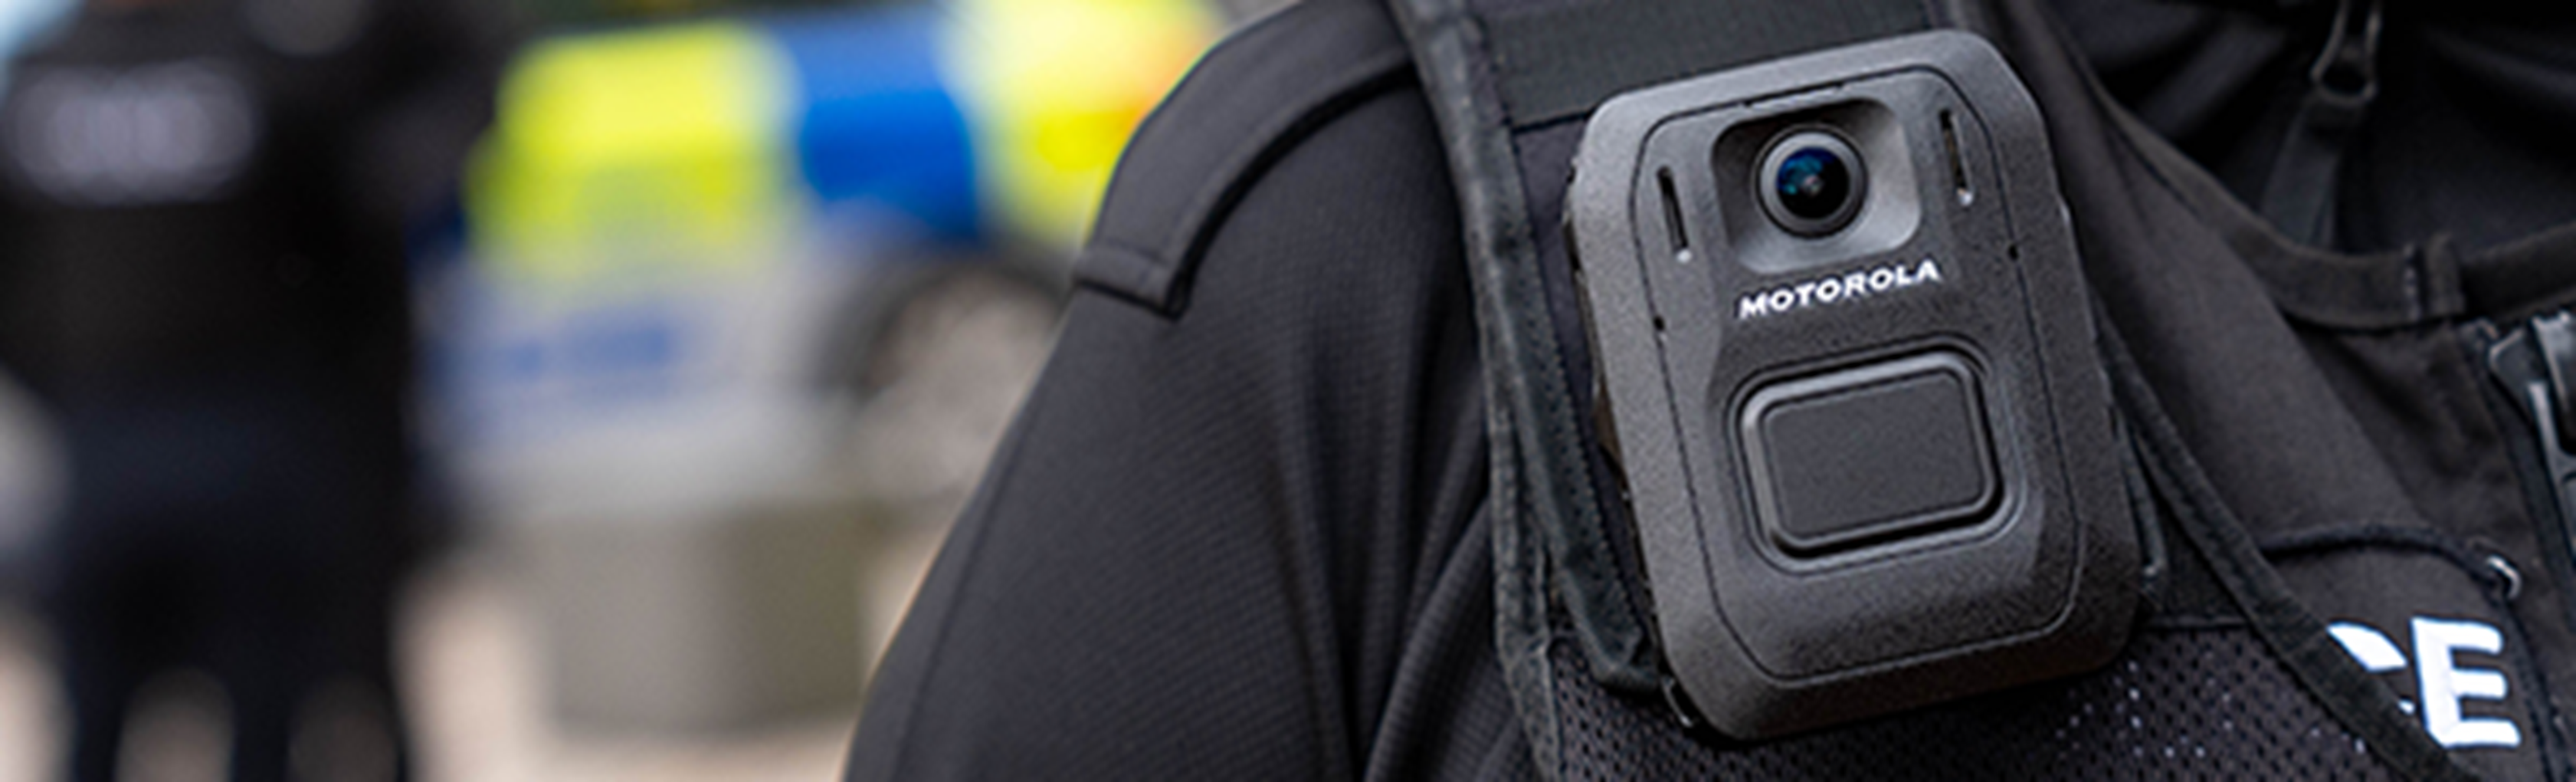 Motorola Solutions Expands Mobile Video Portfolio with LTE-Enabled Body Camera